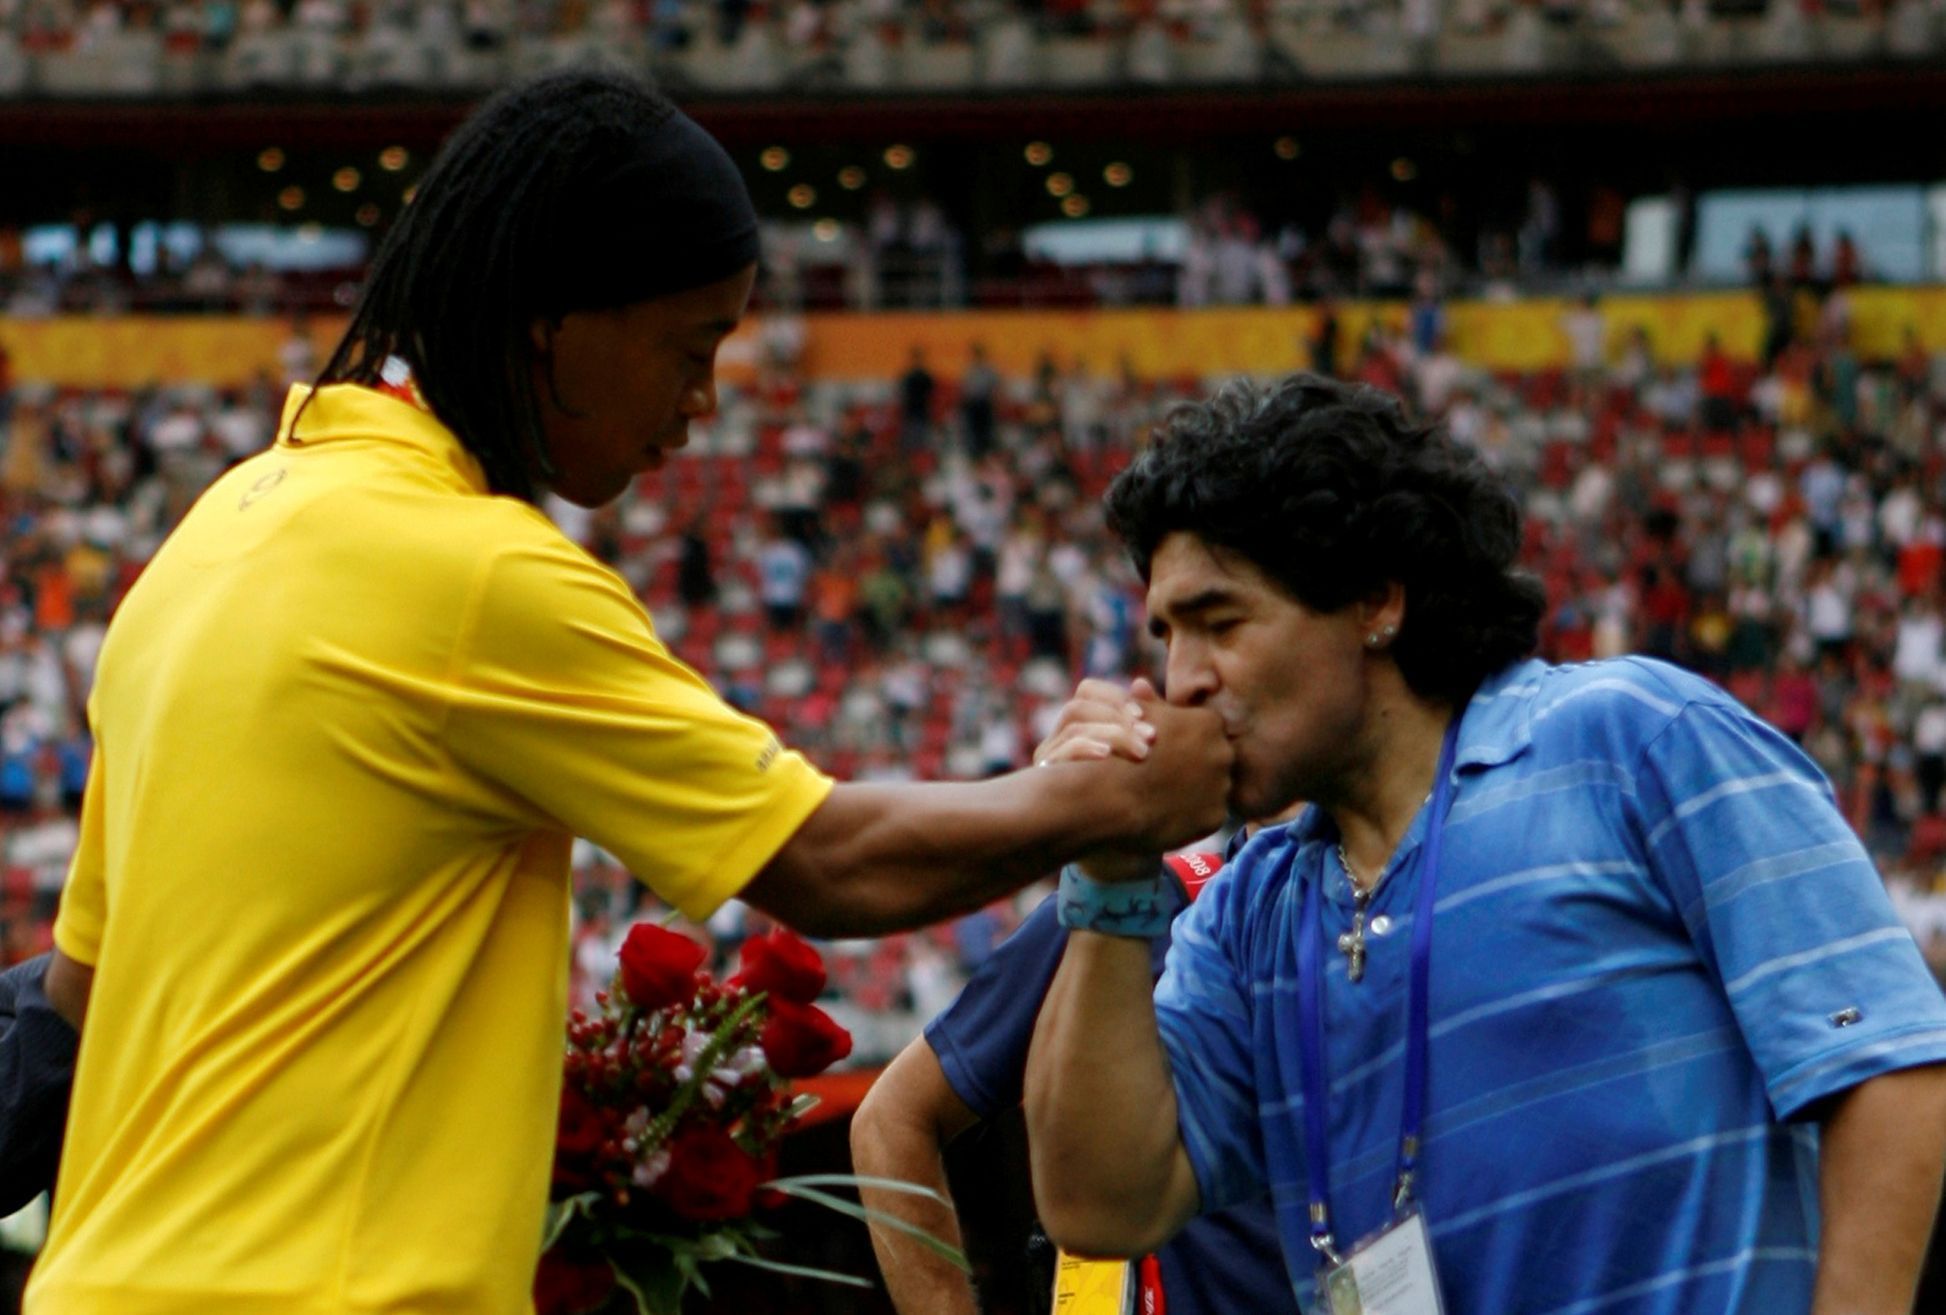 FILE PHOTO: Former Argentine soccer player Diego Maradona kisses the hand of Ronaldinho of Brazil after the medal ceremony for men's soccer at the Beijing 2008 Olympic Games